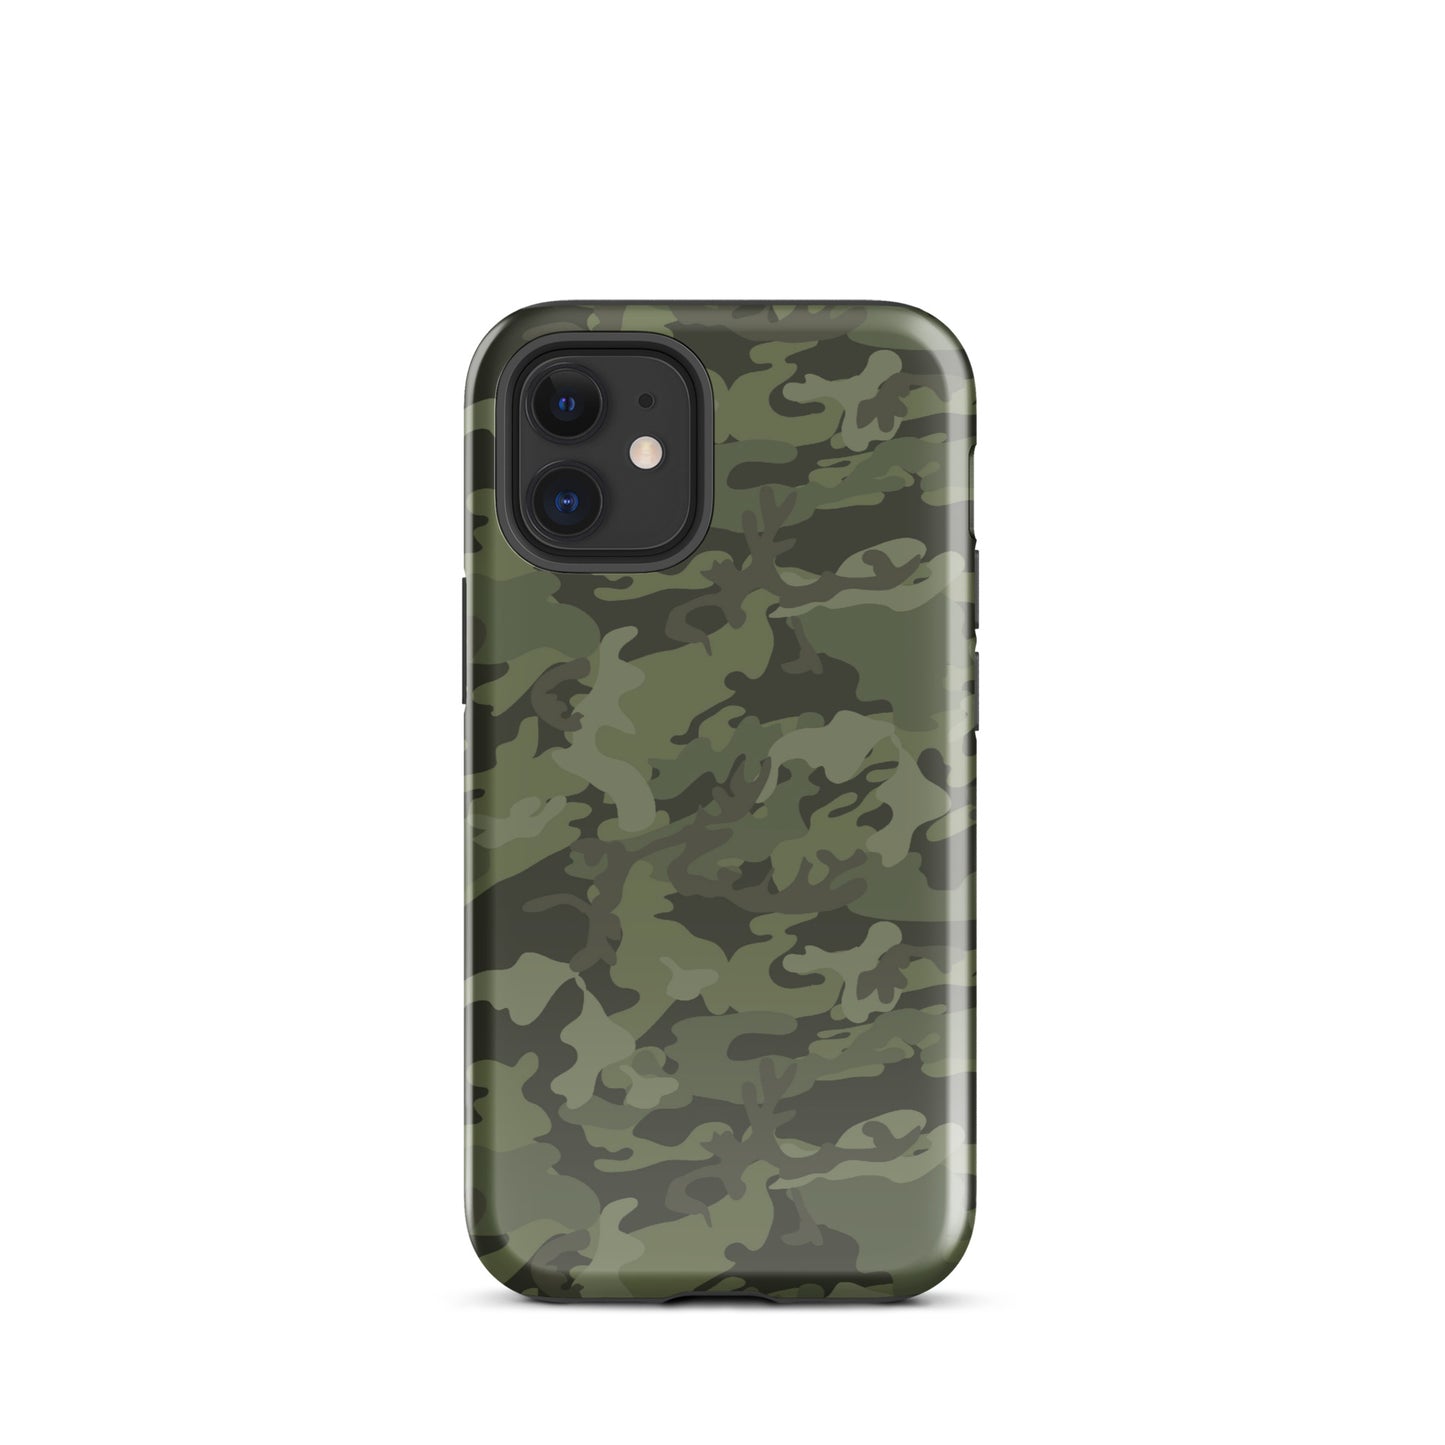 Sniper Takeout - iPhone Tough Case